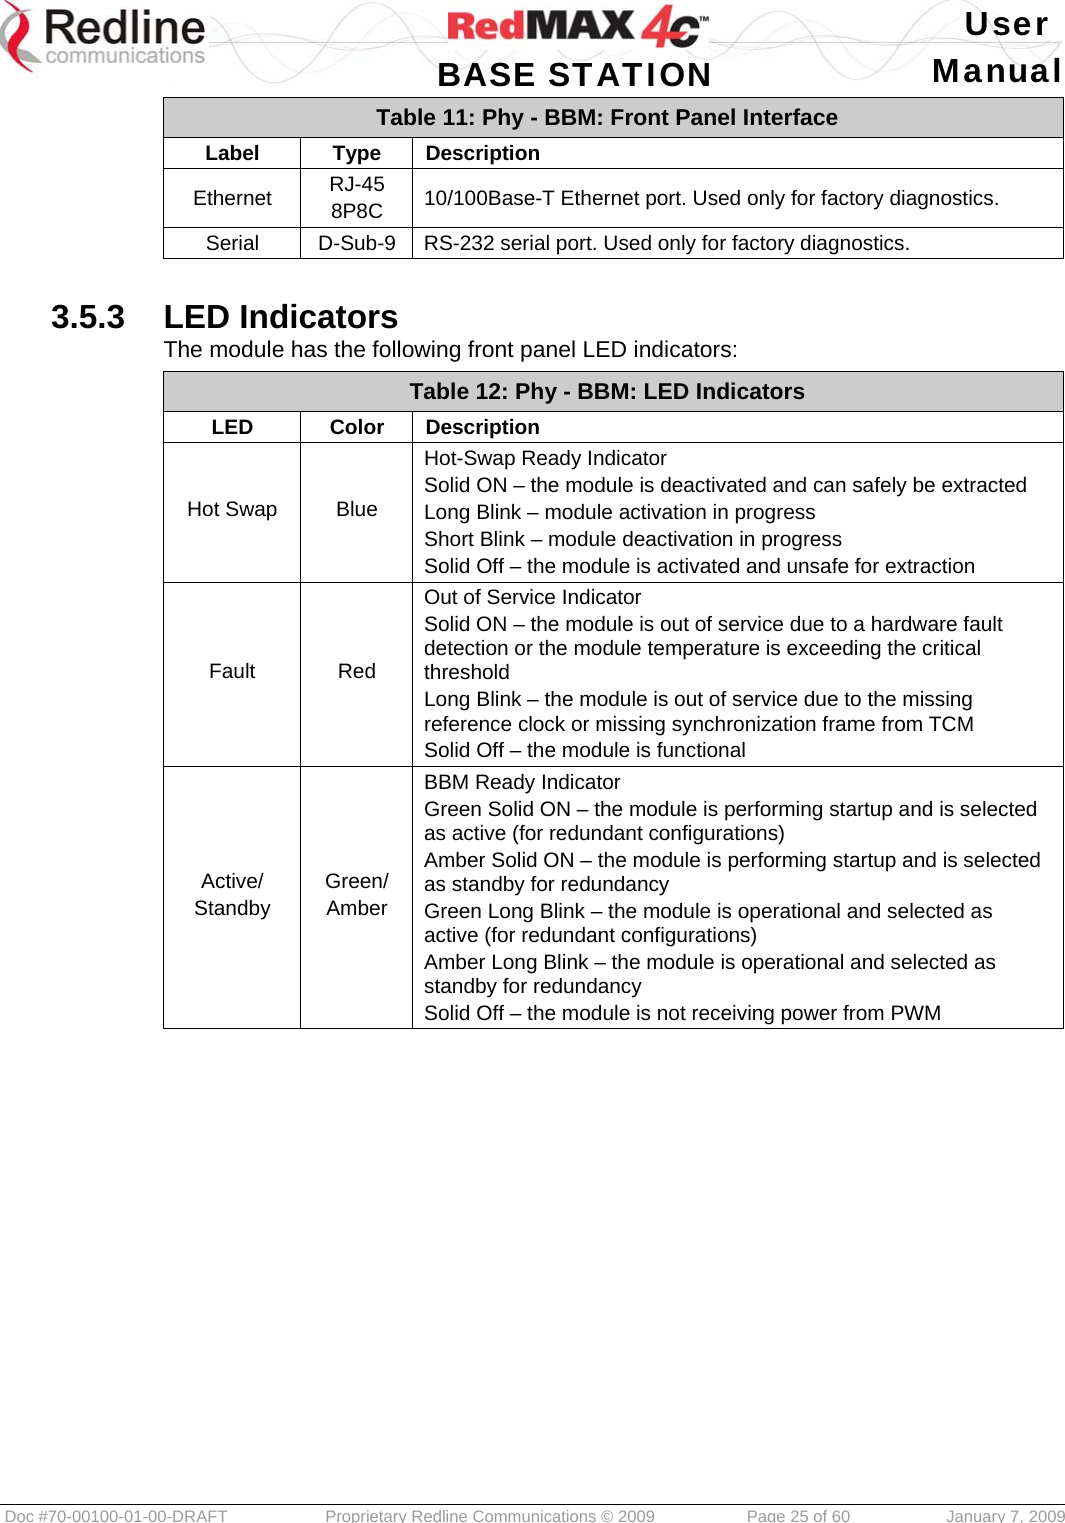   User  BASE STATION Manual  Doc #70-00100-01-00-DRAFT  Proprietary Redline Communications © 2009   Page 25 of 60  January 7, 2009 Table 11: Phy - BBM: Front Panel Interface Label Type Description Ethernet  RJ-45 8P8C  10/100Base-T Ethernet port. Used only for factory diagnostics. Serial  D-Sub-9  RS-232 serial port. Used only for factory diagnostics.  3.5.3  LED Indicators The module has the following front panel LED indicators: Table 12: Phy - BBM: LED Indicators LED Color Description Hot Swap Blue Hot-Swap Ready Indicator Solid ON – the module is deactivated and can safely be extracted Long Blink – module activation in progress  Short Blink – module deactivation in progress  Solid Off – the module is activated and unsafe for extraction Fault Red Out of Service Indicator Solid ON – the module is out of service due to a hardware fault detection or the module temperature is exceeding the critical threshold Long Blink – the module is out of service due to the missing reference clock or missing synchronization frame from TCM Solid Off – the module is functional Active/ Standby Green/ Amber BBM Ready Indicator Green Solid ON – the module is performing startup and is selected as active (for redundant configurations) Amber Solid ON – the module is performing startup and is selected as standby for redundancy Green Long Blink – the module is operational and selected as active (for redundant configurations) Amber Long Blink – the module is operational and selected as standby for redundancy Solid Off – the module is not receiving power from PWM   